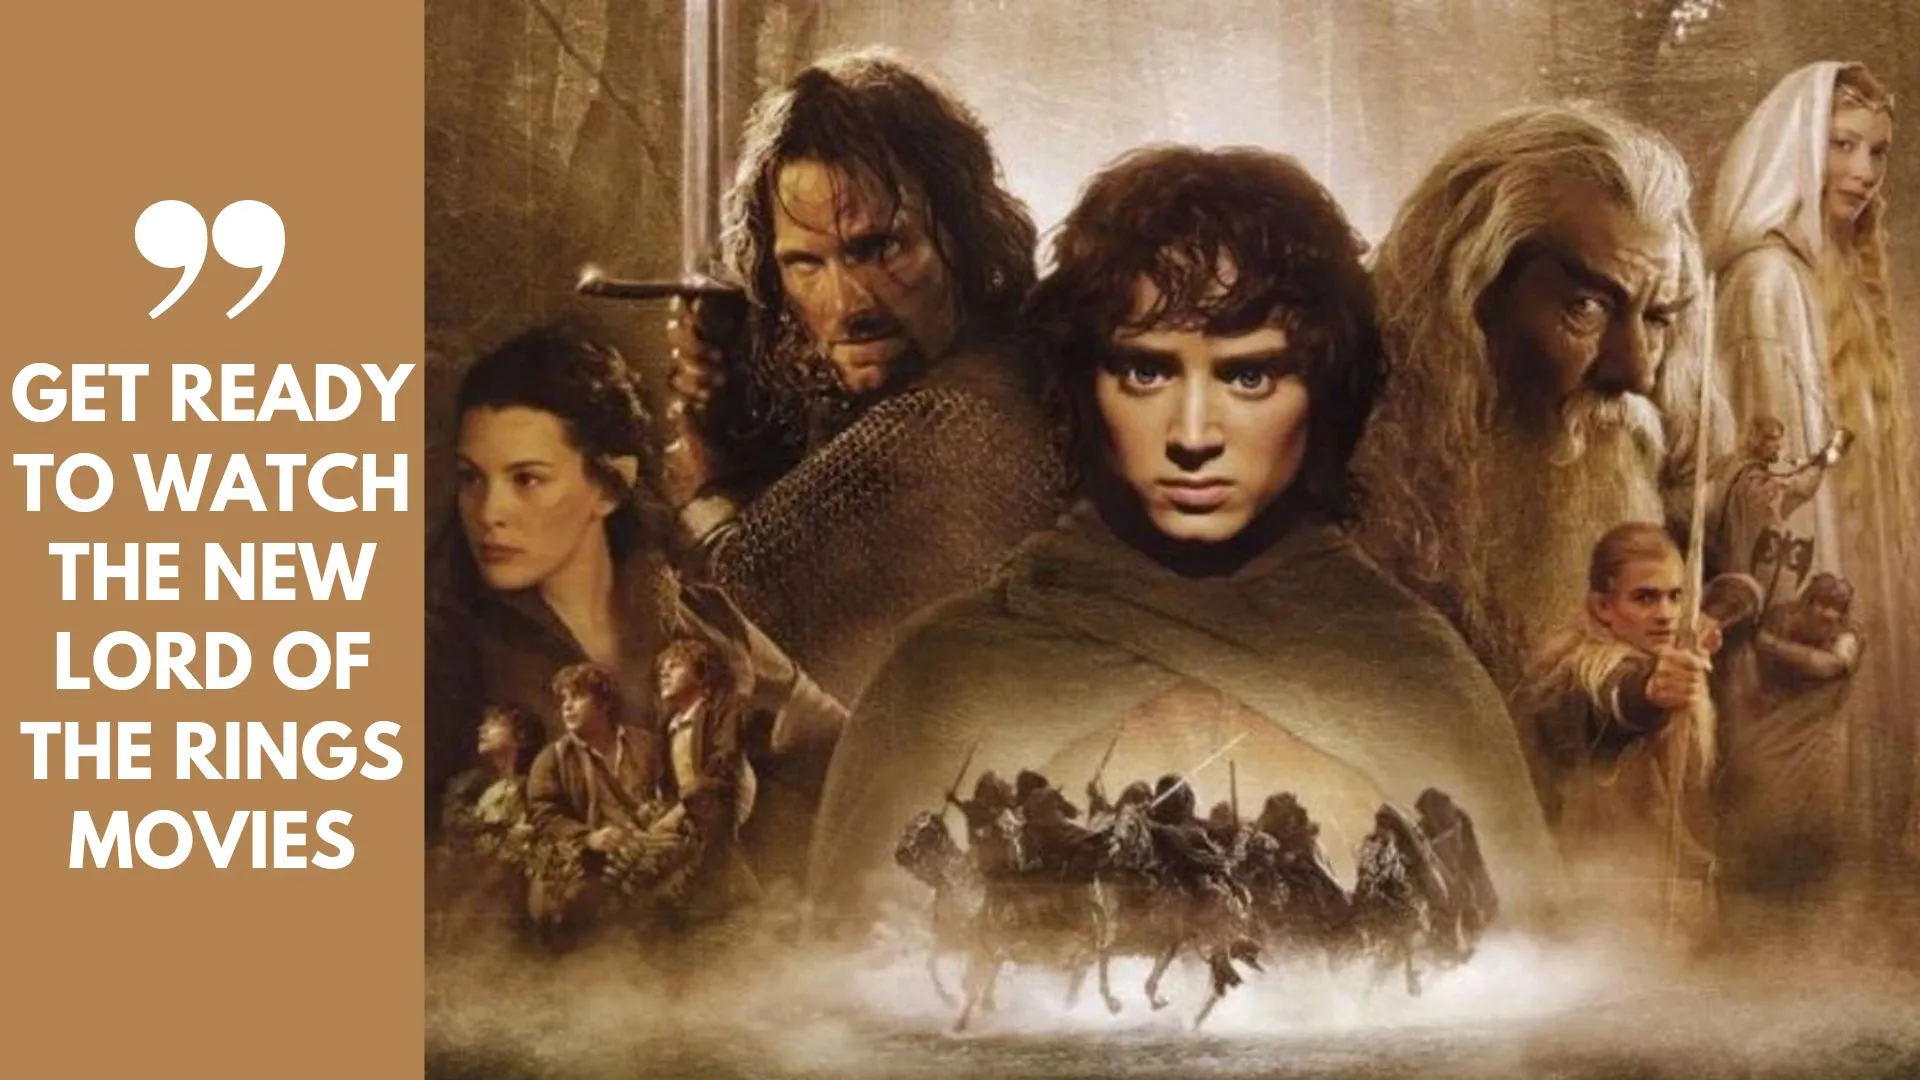 Get ready to watch the New Lord of the Rings Movies (Image credit: denofgeek)